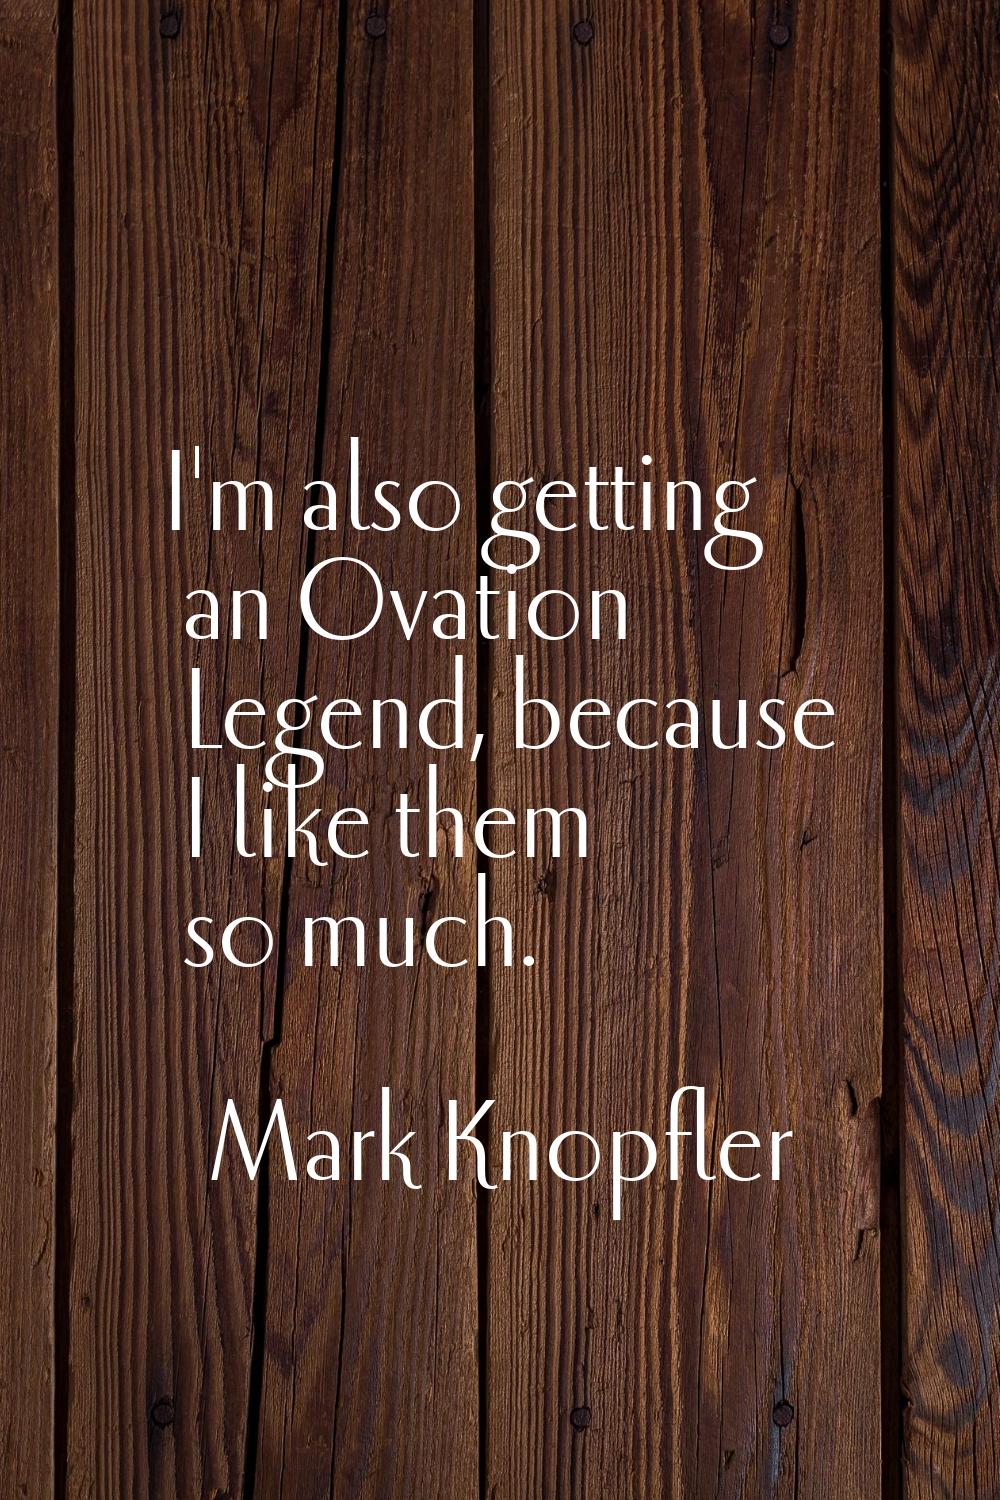 I'm also getting an Ovation Legend, because I like them so much.